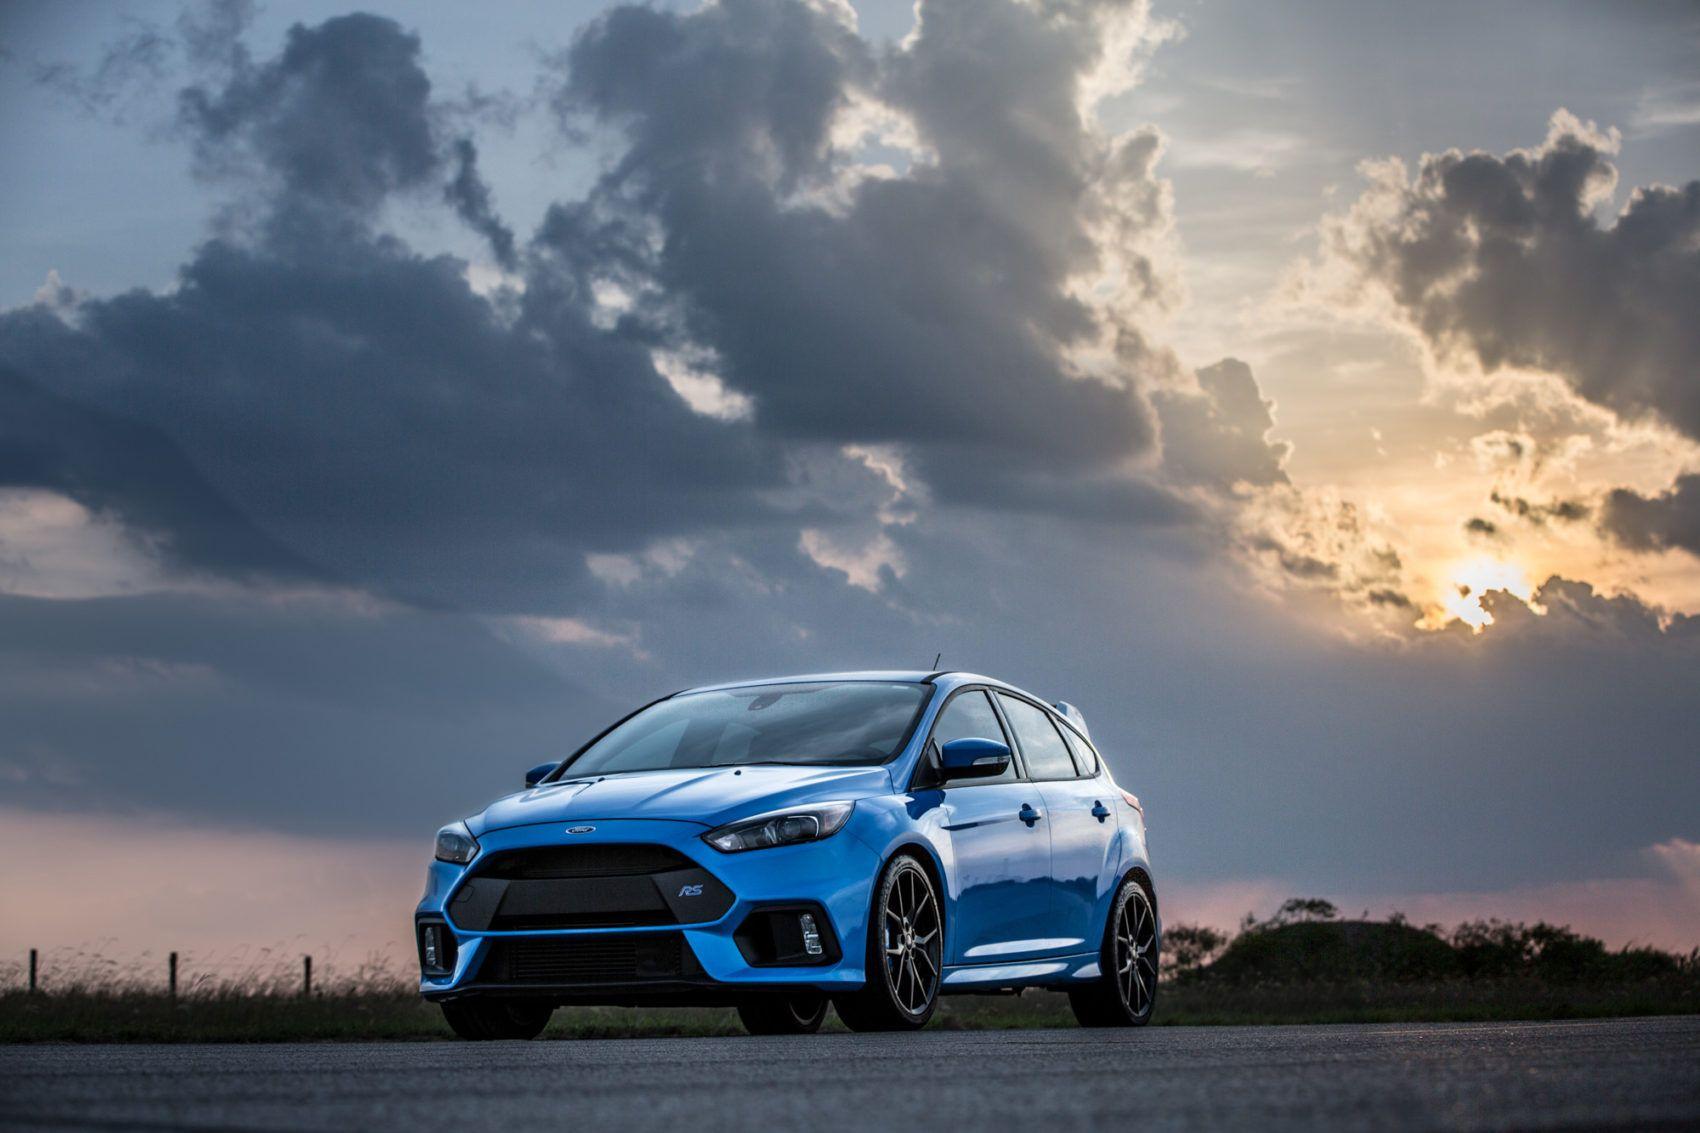 Download Wallpapers Ford Focus Rs Limited Edition 4k 2018 Cars Tuning Blue Focus Ford For Desktop Free Pictures For Desktop Free